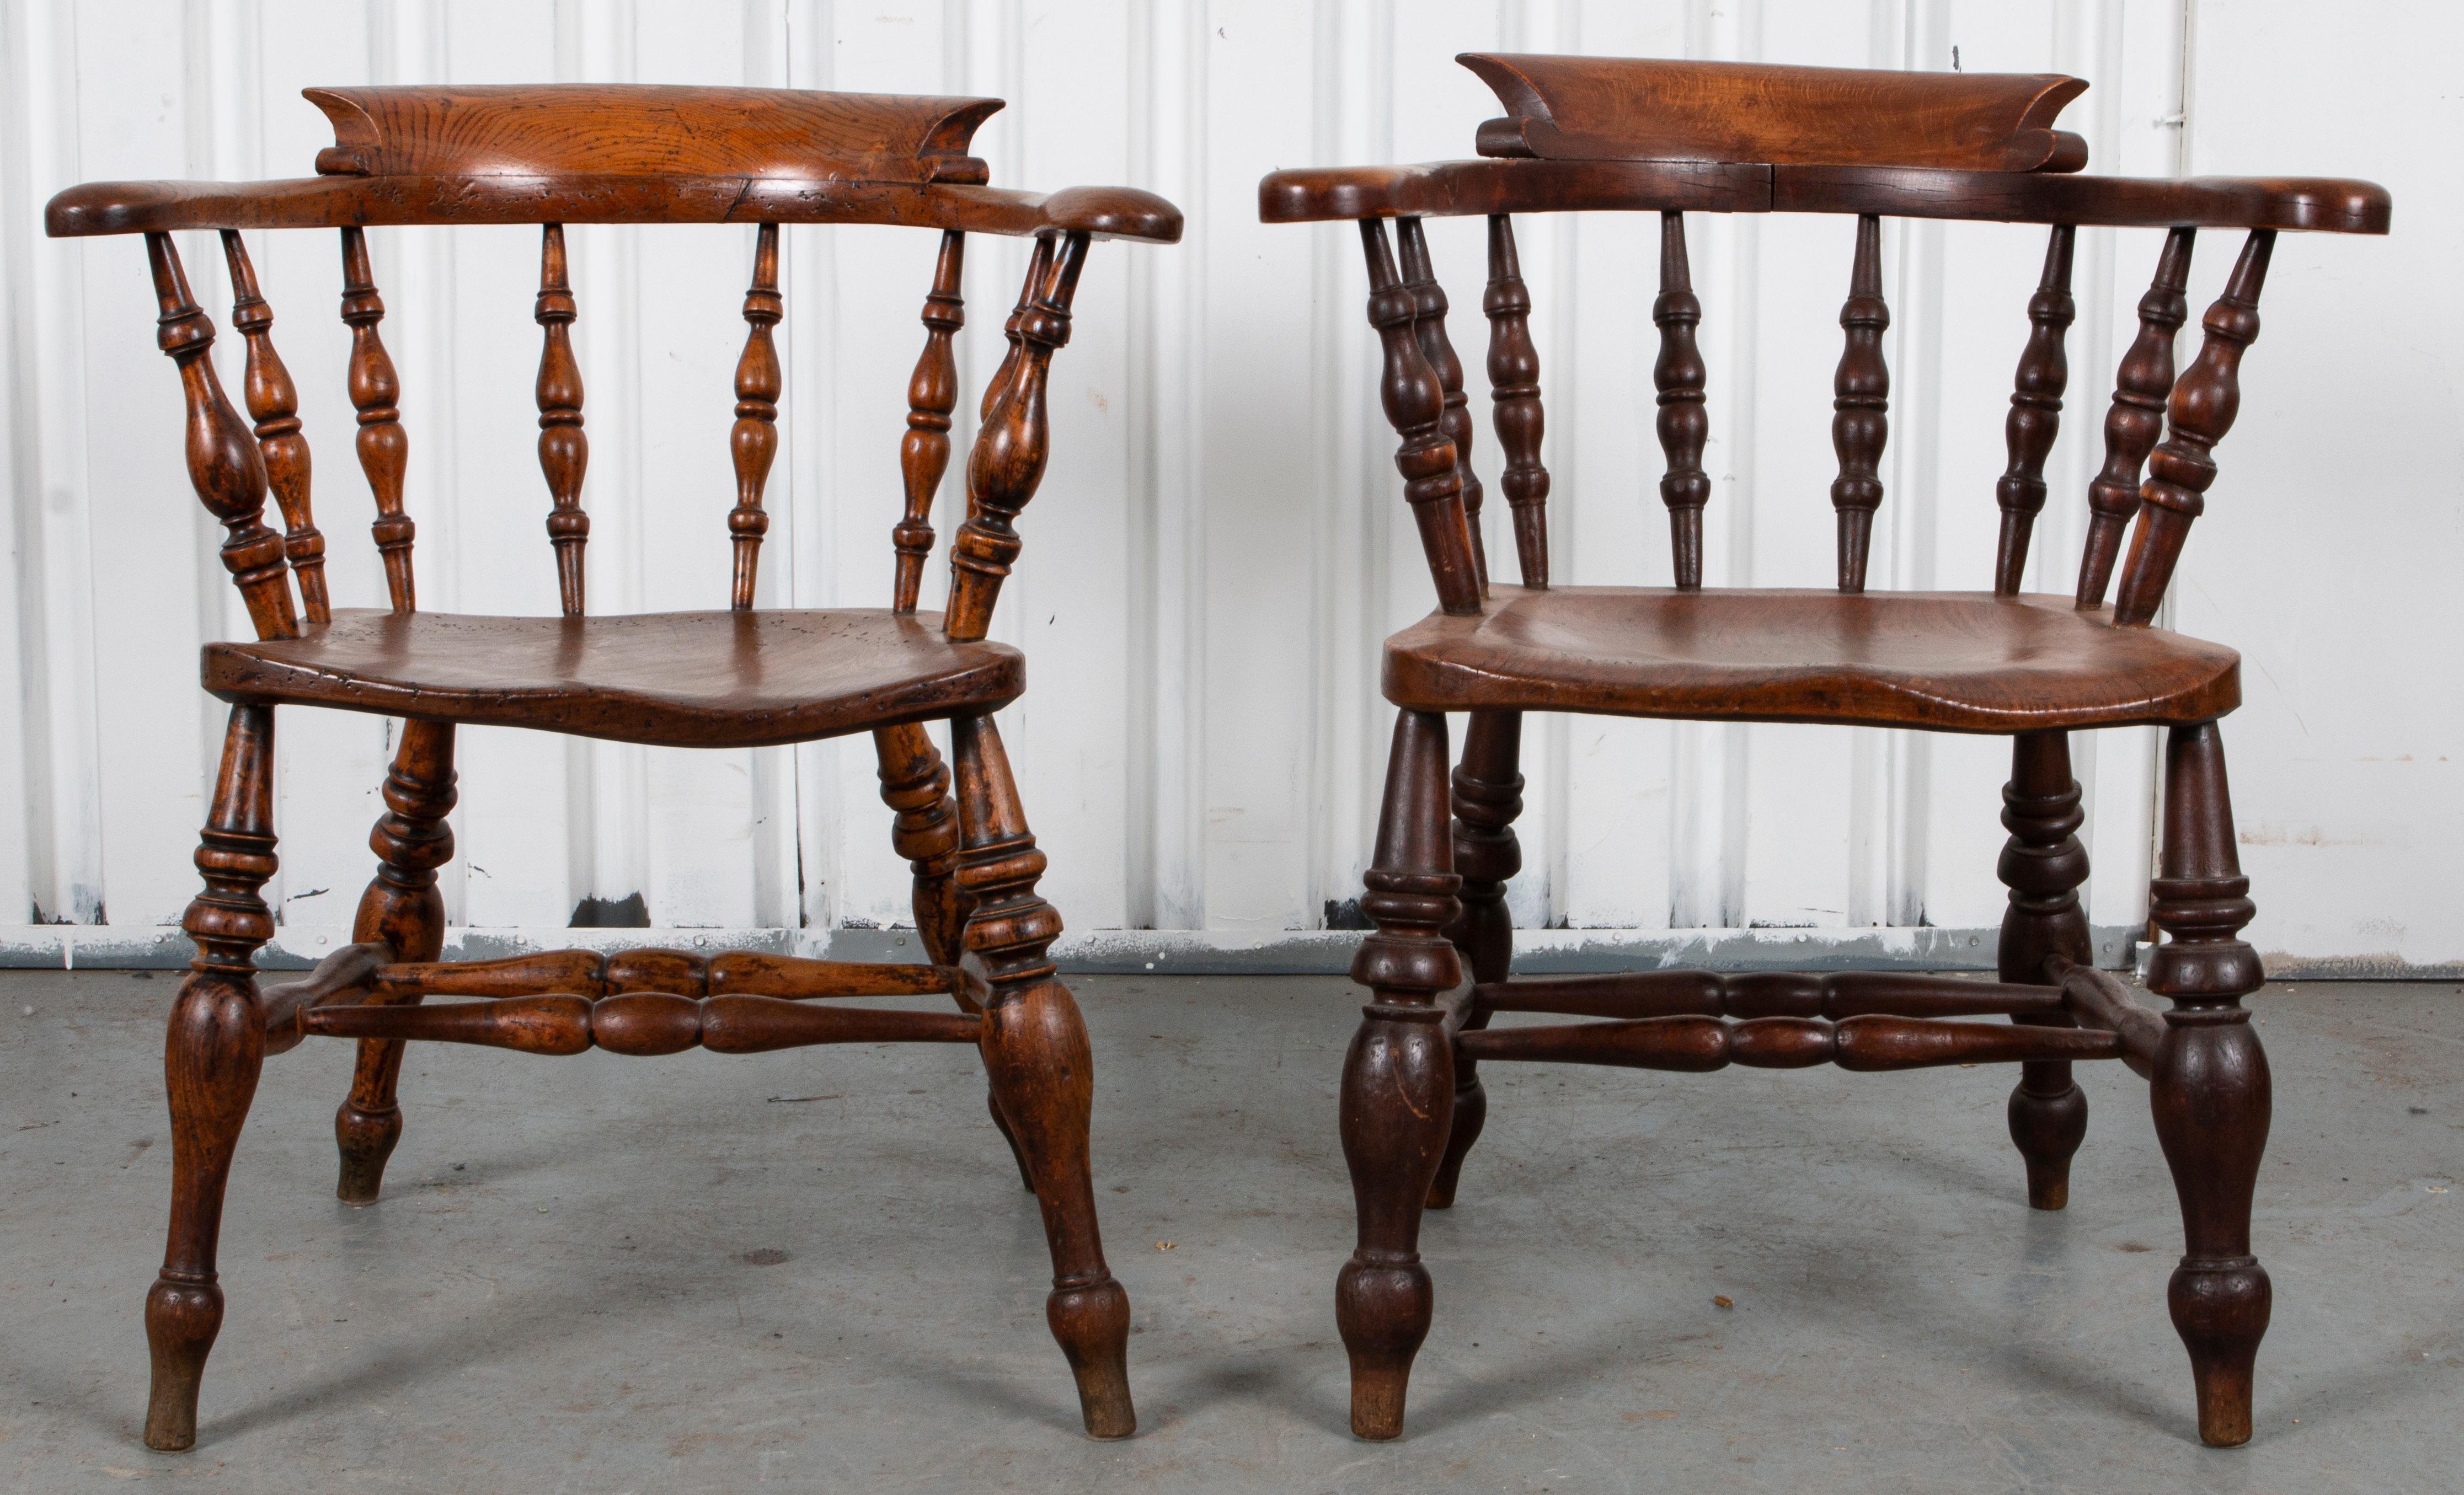 Pair of English figured yew wood Captain / Smoker Bow chairs, late 19th century, throughout with turned spindle elements, the horseshoe shaped back and arm rests above the conforming plank seat.